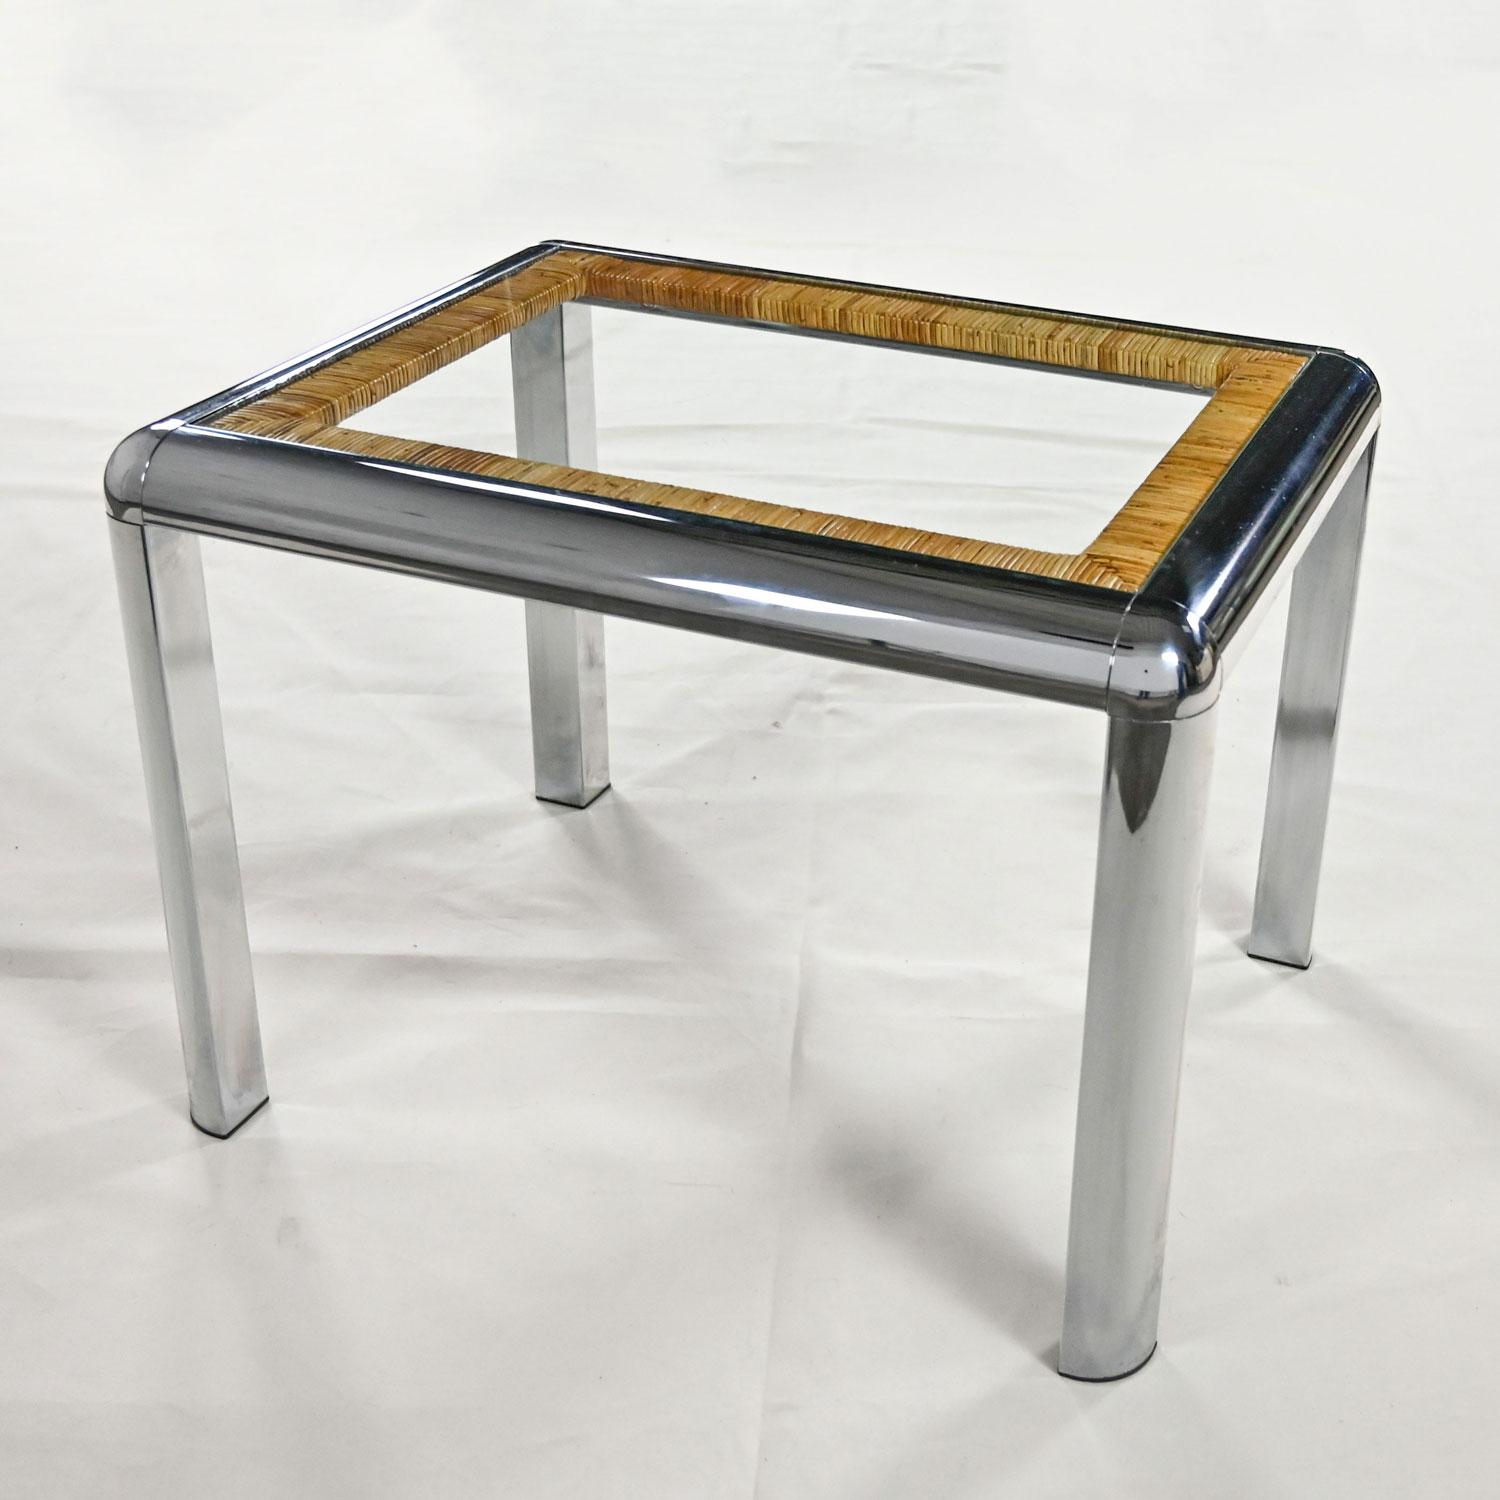 Vintage Modern Rectangular Chrome Glass & Wrapped Rattan Side Table Attr to DIA For Sale 9